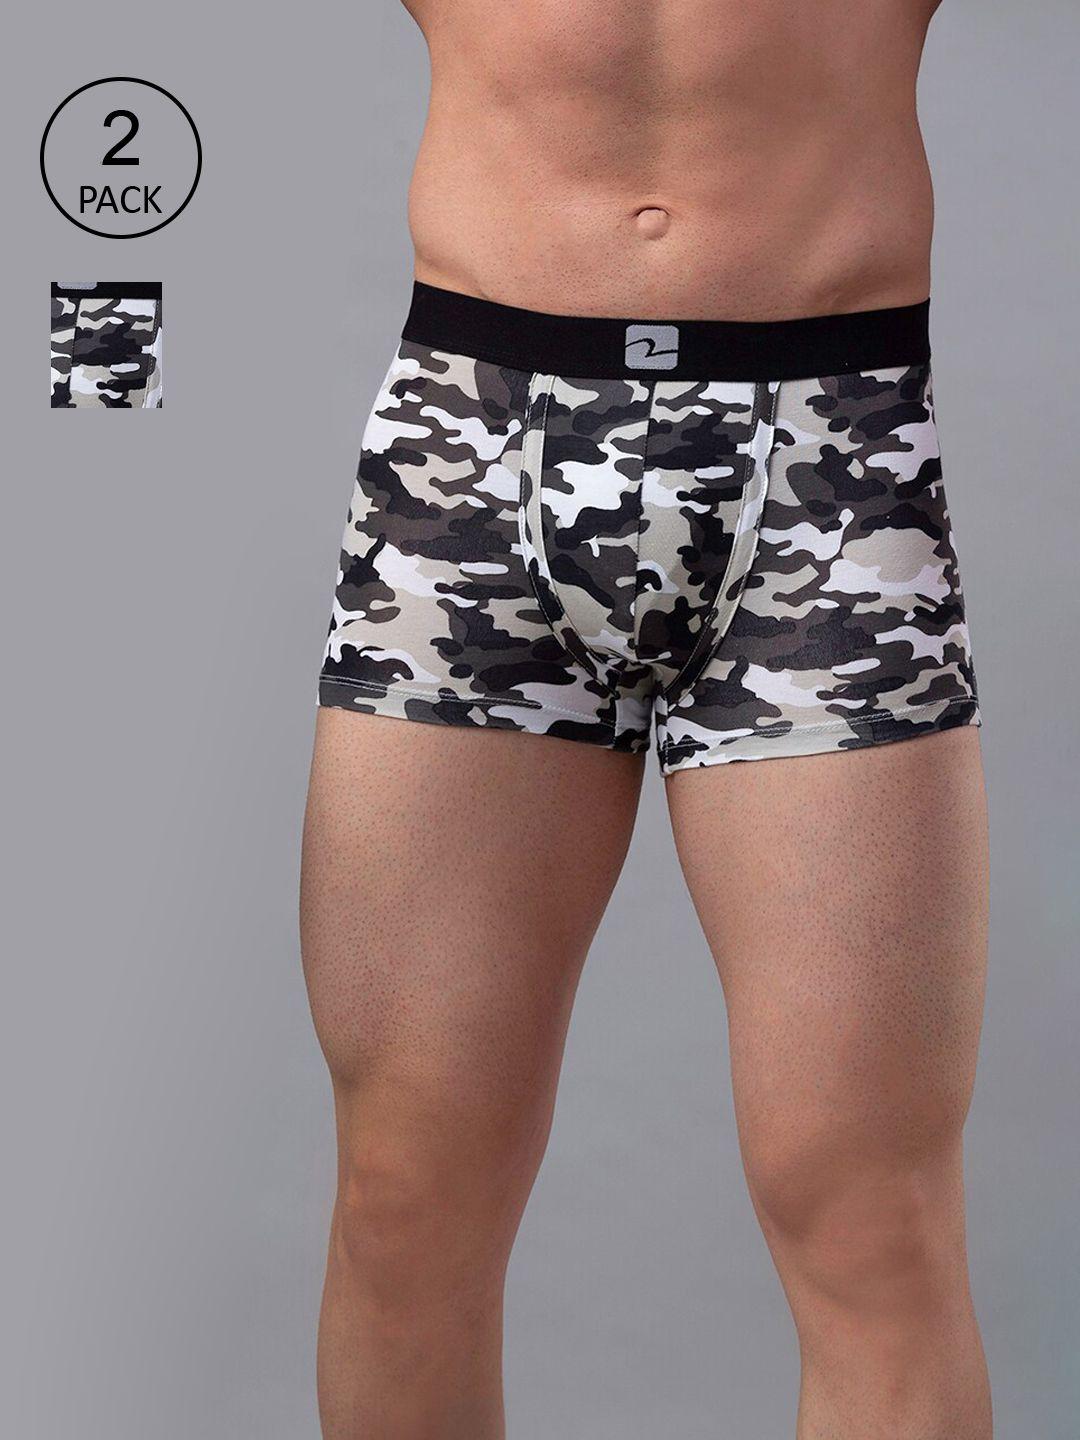 underjeans by spykar men pack of 2 camouflage printed cotton blend trunks ujnptc024camo 1